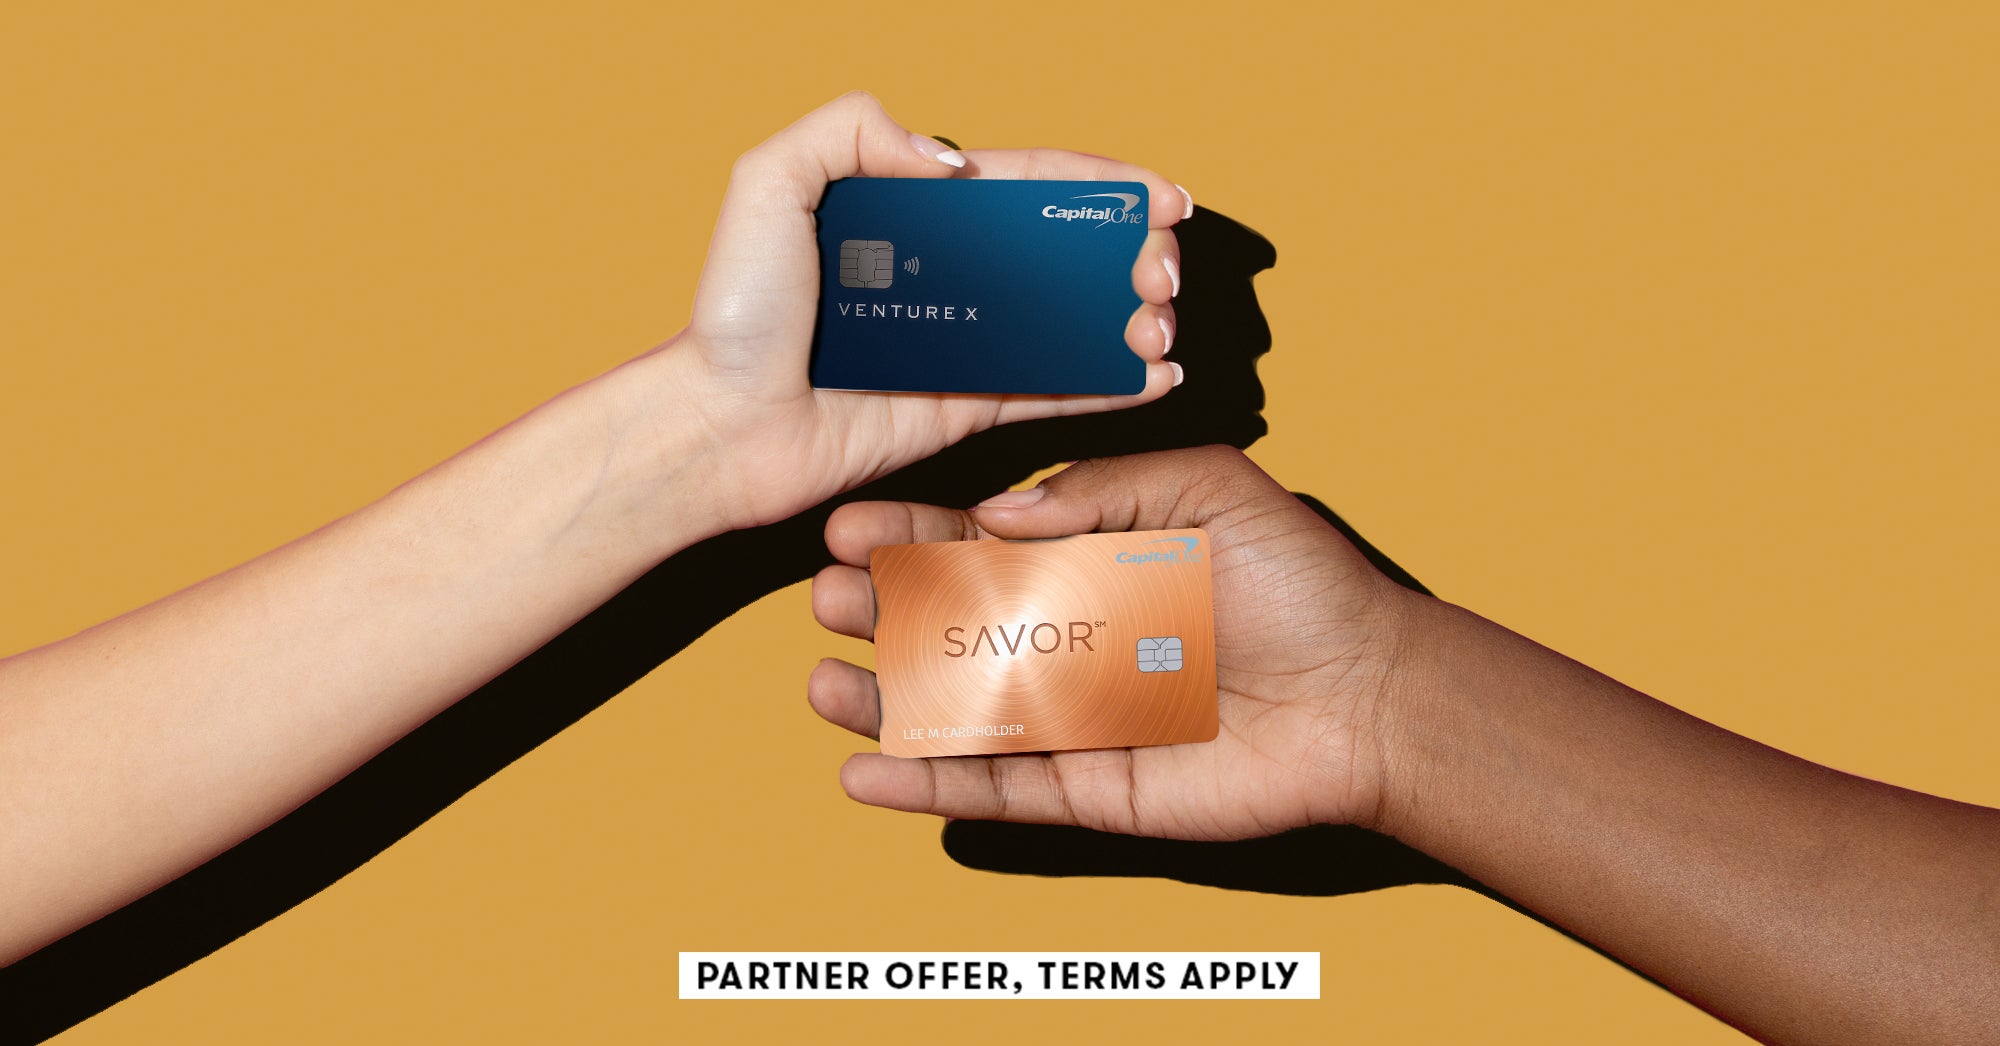 Why the Capital One Venture X and Savor Cash credit cards make a